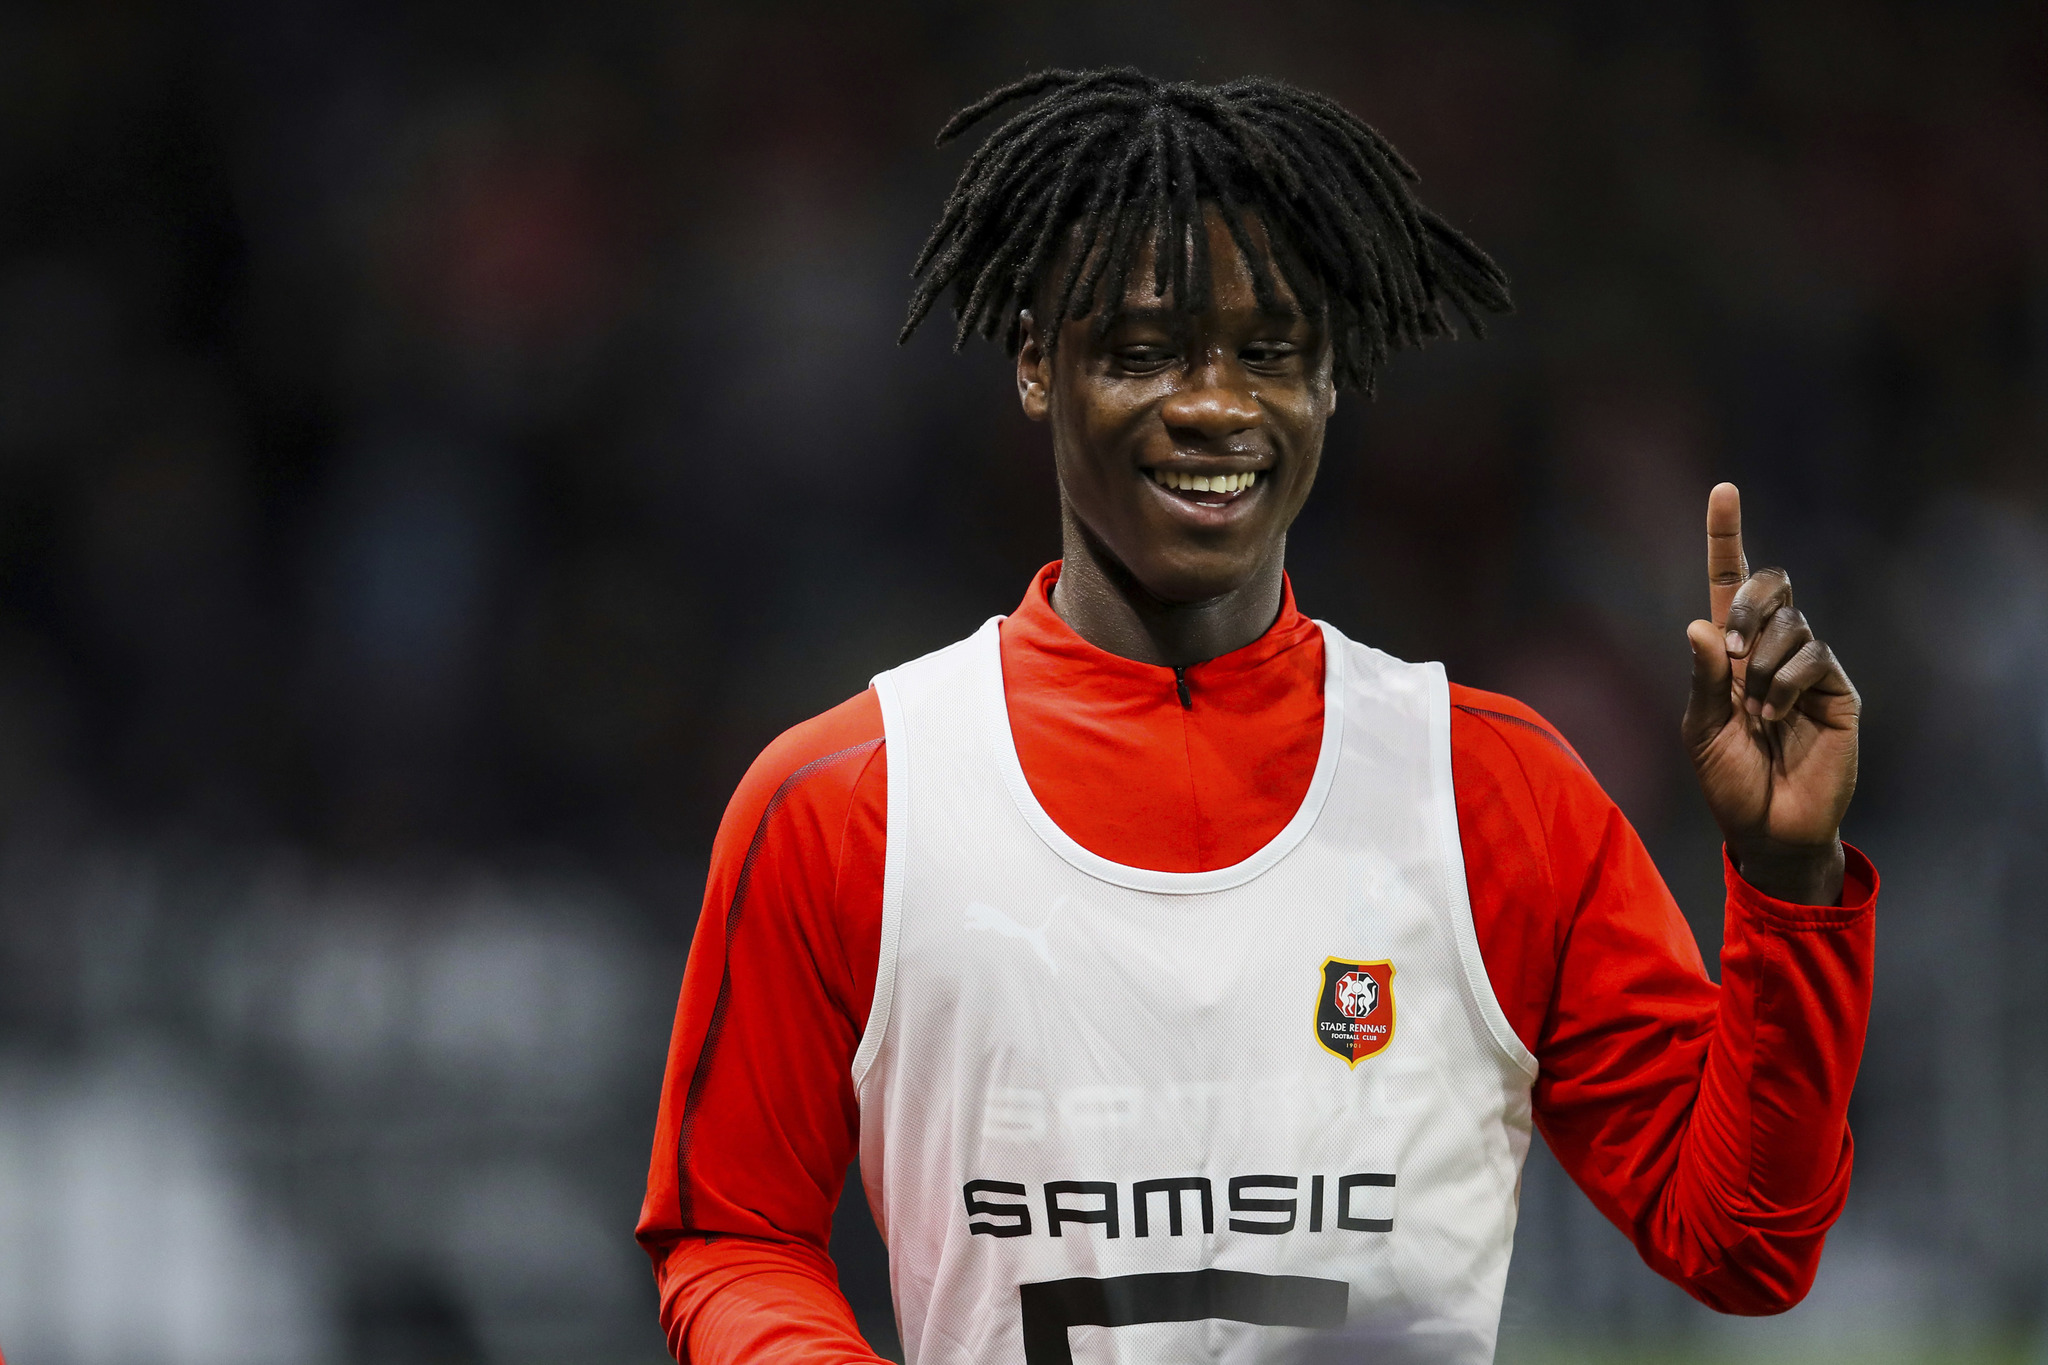 Eduardo lt;HIT gt;CAMAVINGA lt;/HIT gt; of Rennes during the Ligue 1 match between Stade Rennais and Olympique de Marseille on January 10, 2020 in Rennes, France. (Photo by Vincent Michel/Icon Sport via Getty Images)